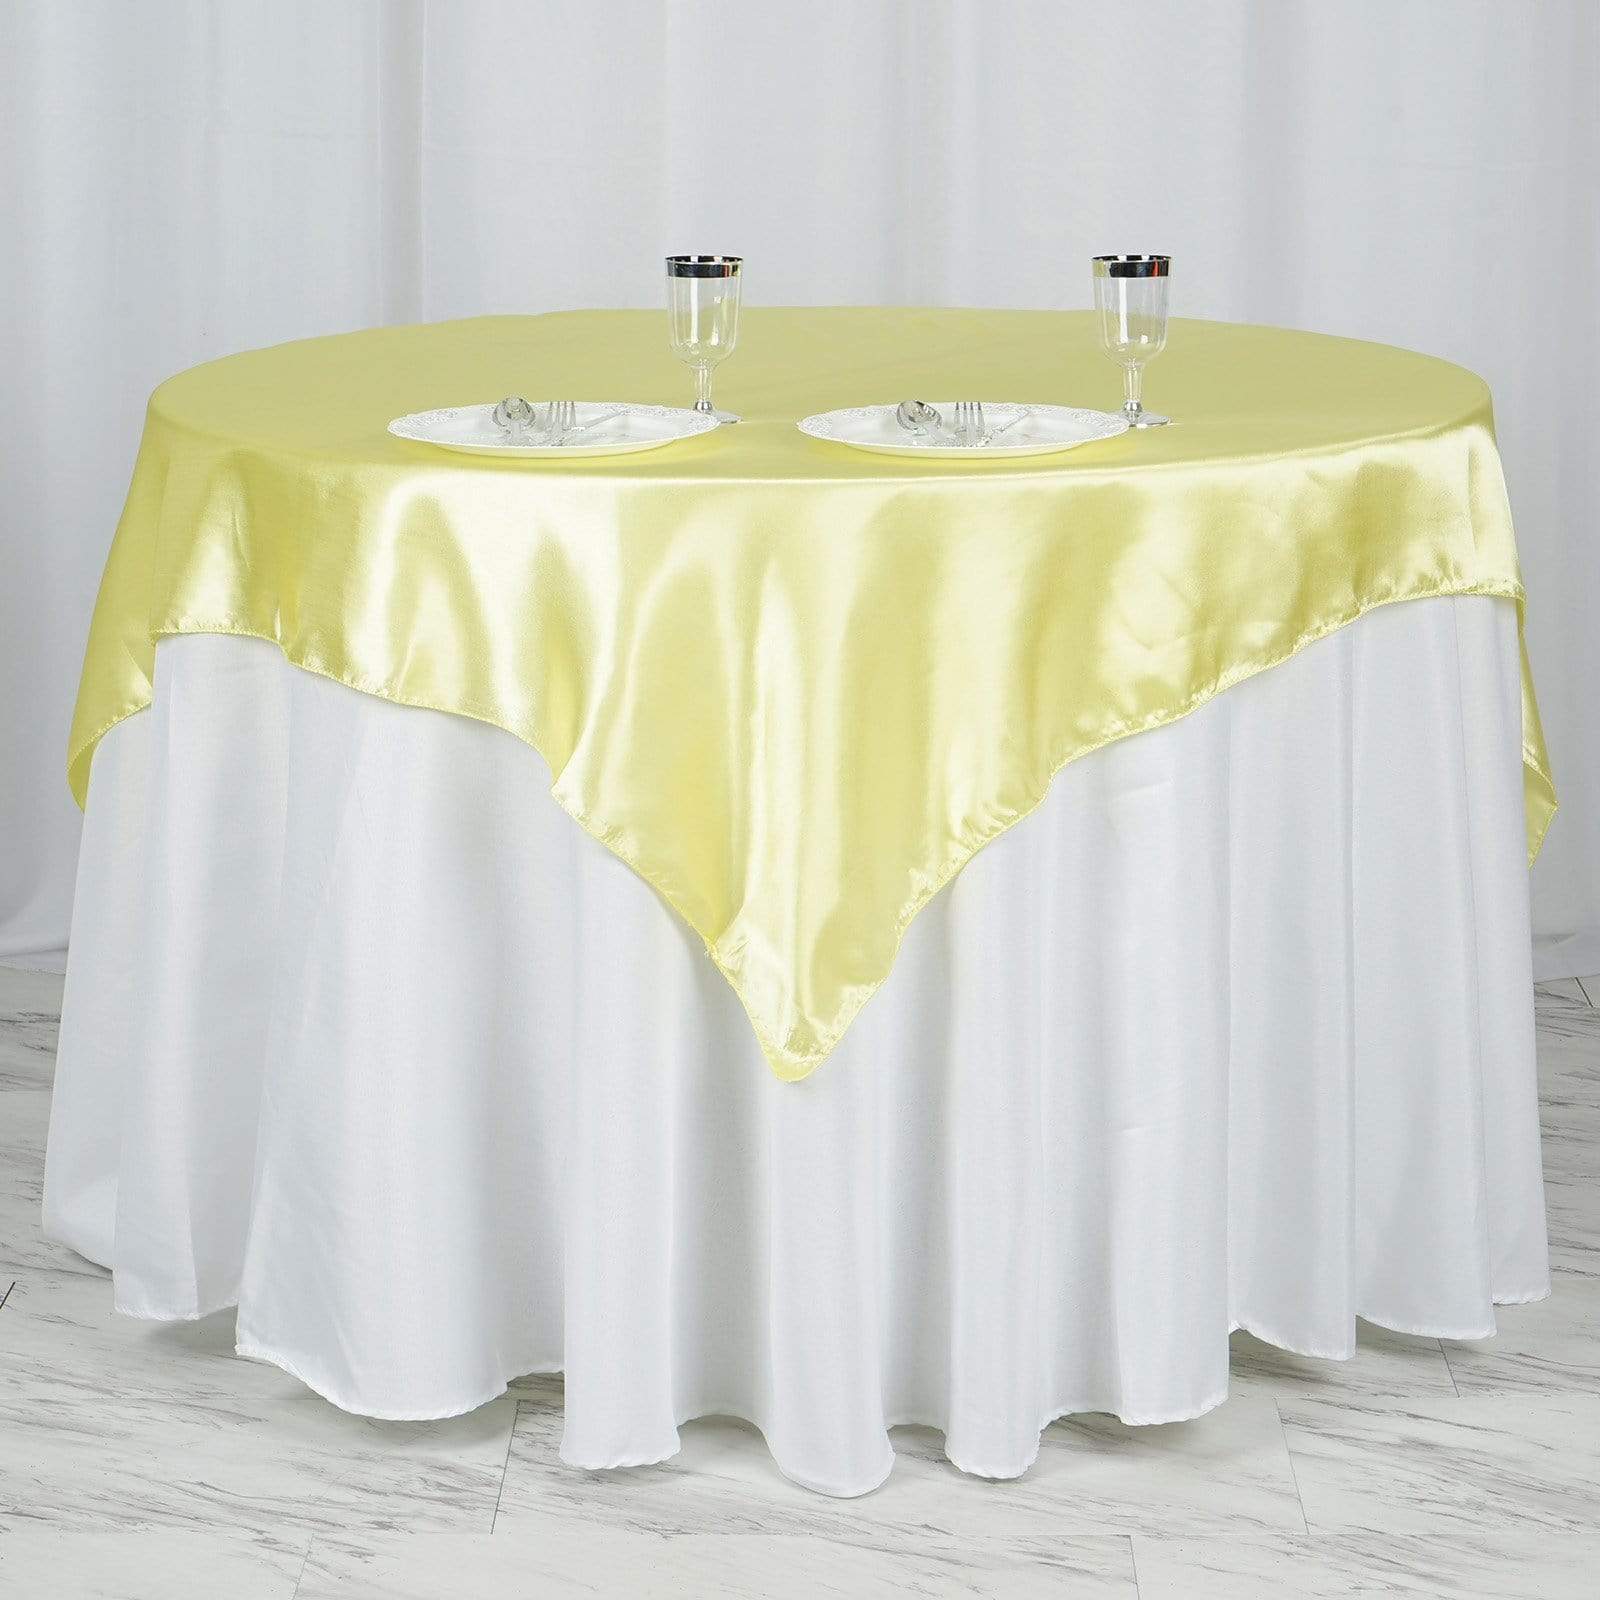 60-inch-square-satin-table-overlay-pink